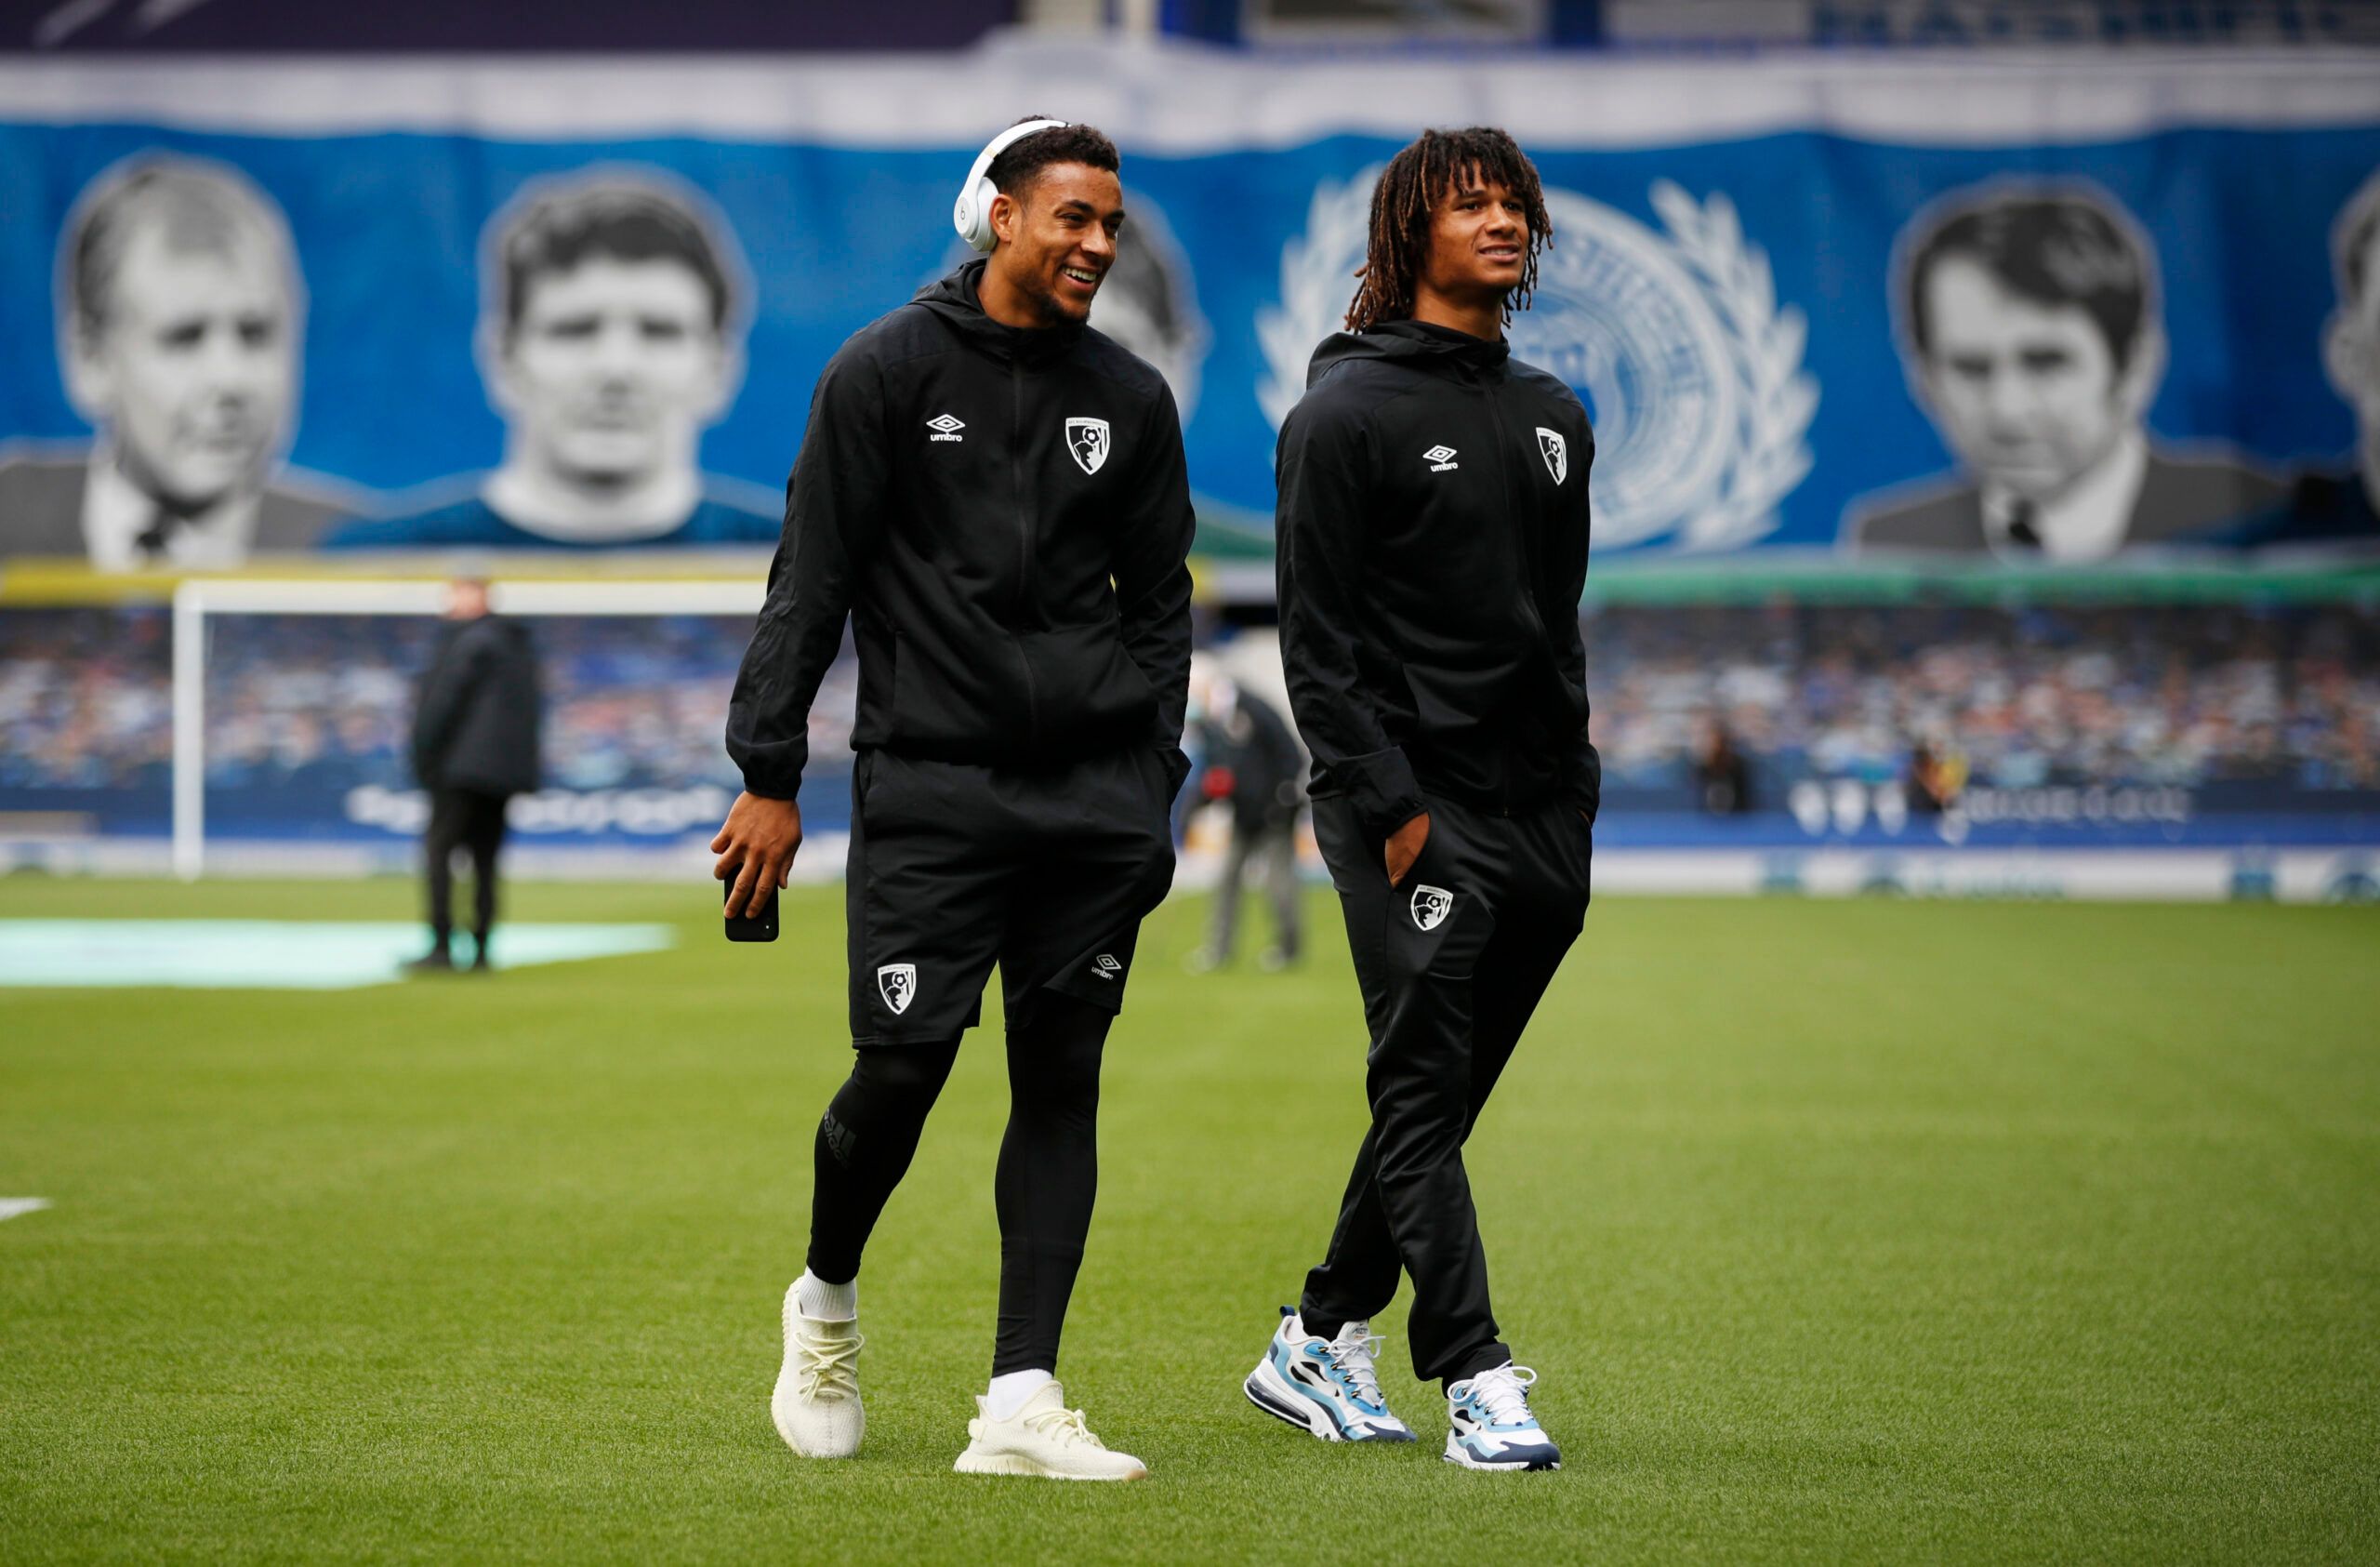 Soccer Football - Premier League - Everton v AFC Bournemouth - Goodison Park, Liverpool, Britain - July 26, 2020  Bournemouth's Nathan Ake on the pitch before the match, as play resumes behind closed doors following the outbreak of the coronavirus disease (COVID-19) Pool via REUTERS/Clive Brunskill EDITORIAL USE ONLY. No use with unauthorized audio, video, data, fixture lists, club/league logos or 'live' services. Online in-match use limited to 75 images, no video emulation. No use in betting, g